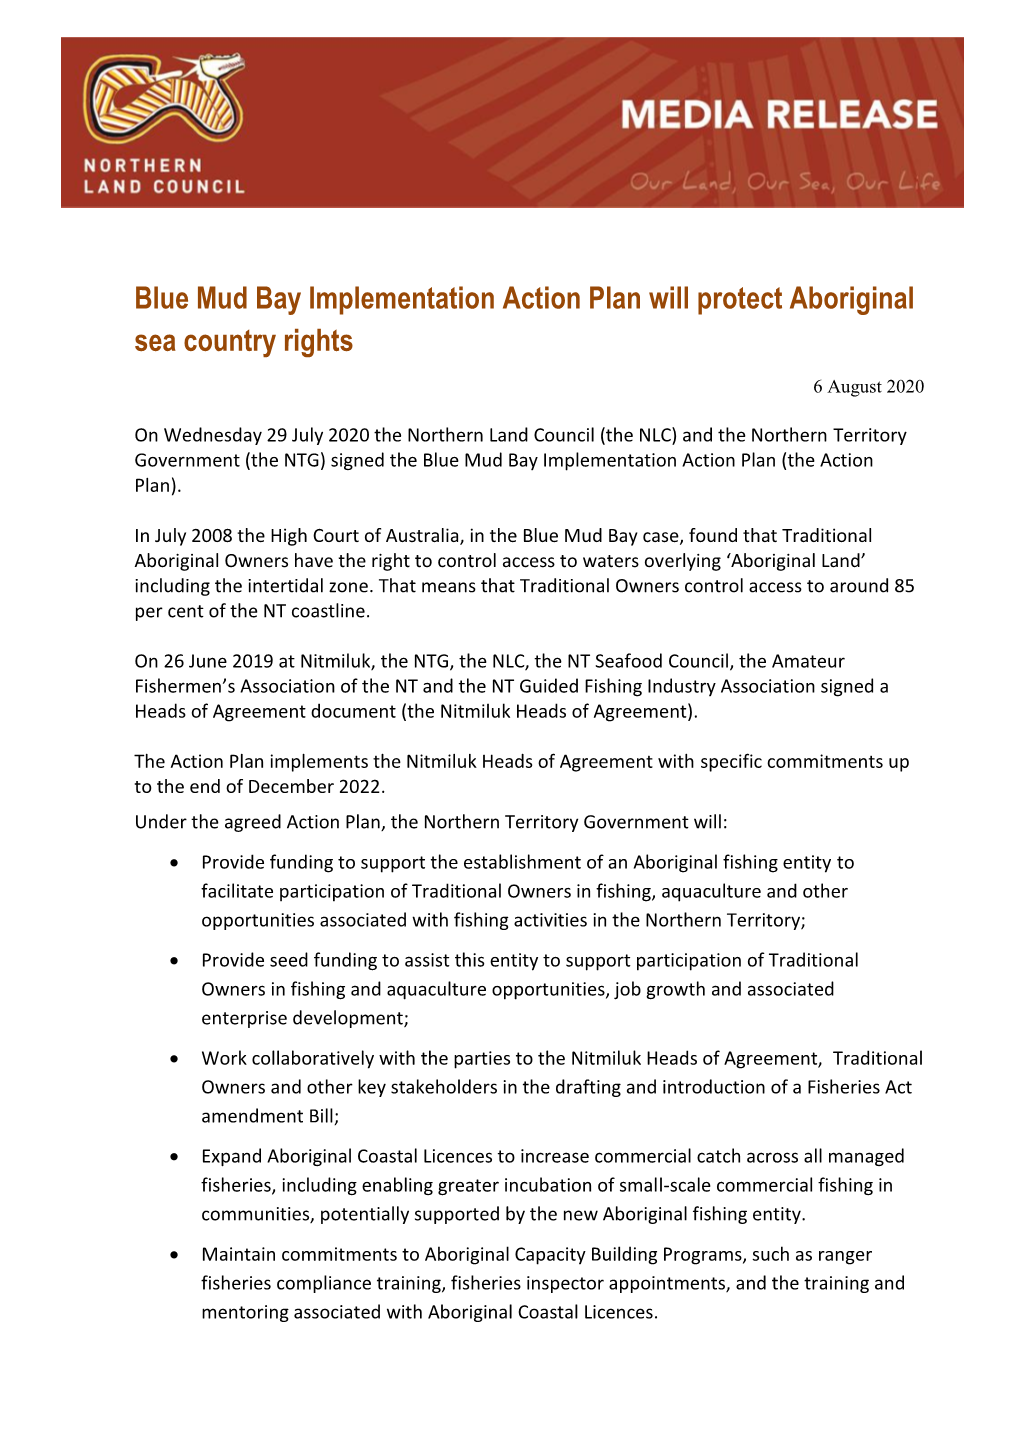 Blue Mud Bay Implementation Action Plan Will Protect Aboriginal Sea Country Rights